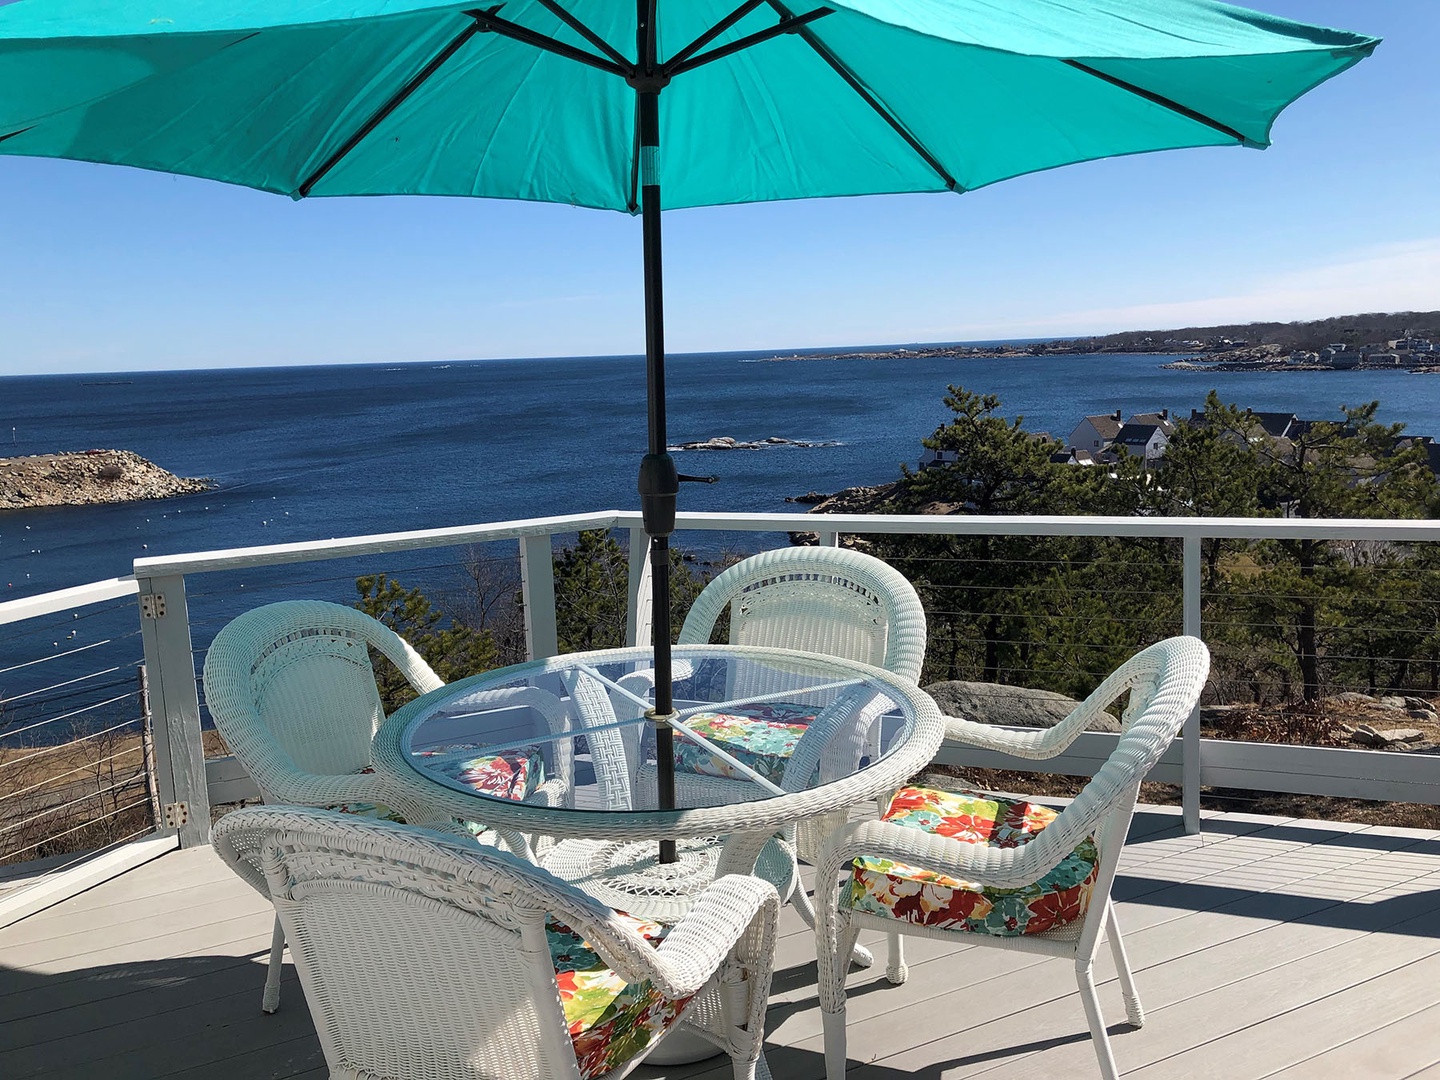 Dine outdoors while enjoying this ocean view of Rockport.